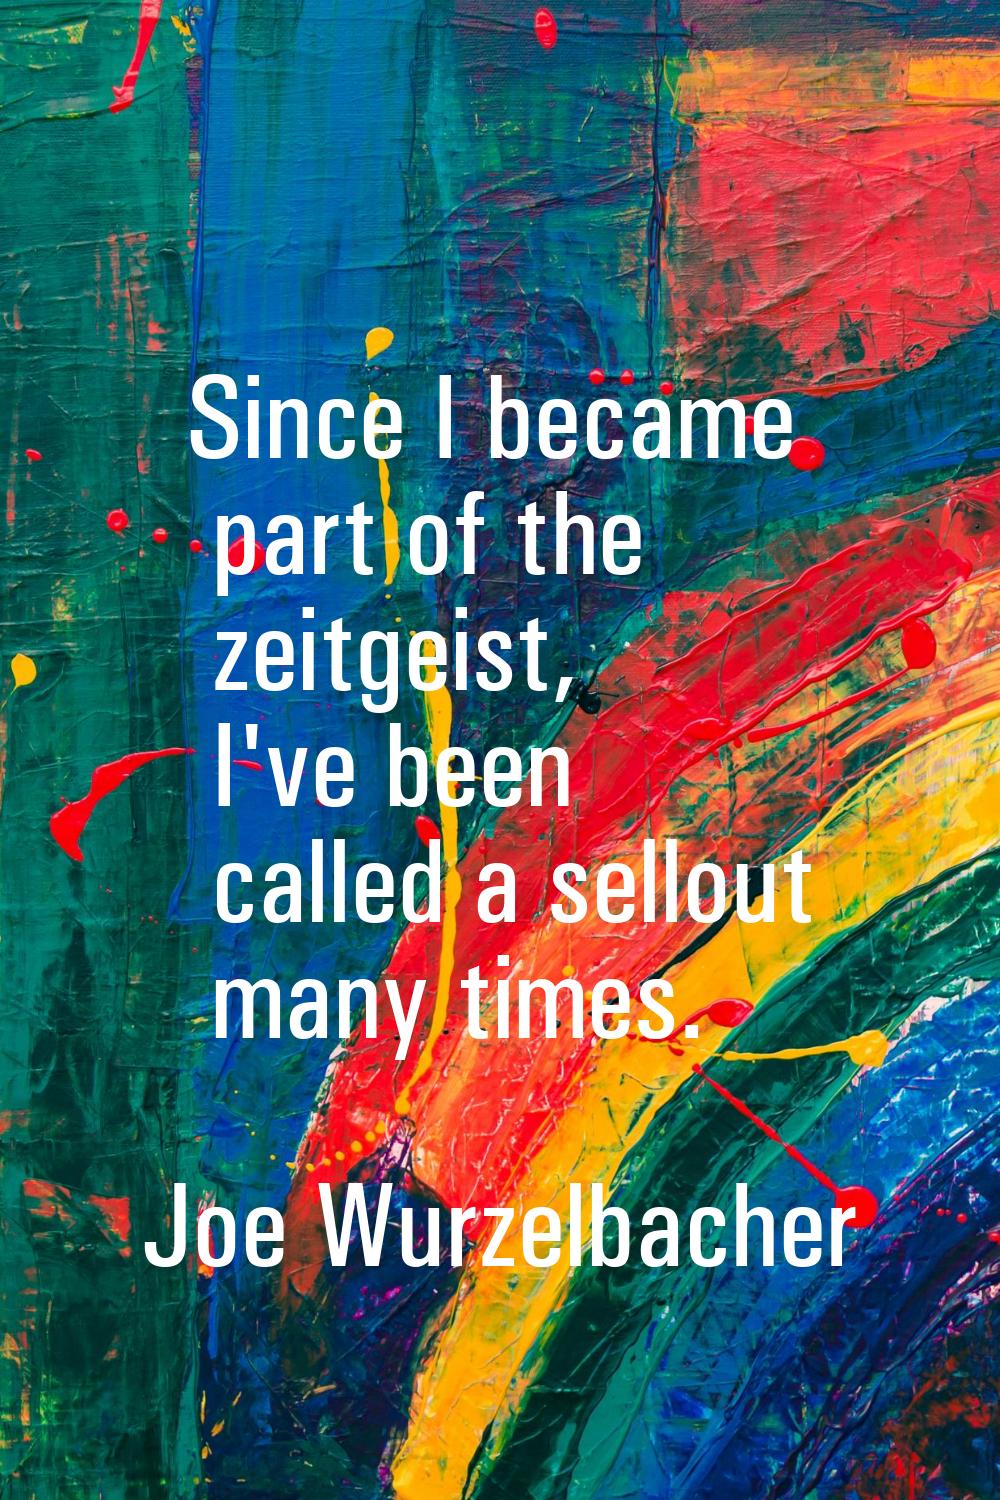 Since I became part of the zeitgeist, I've been called a sellout many times.